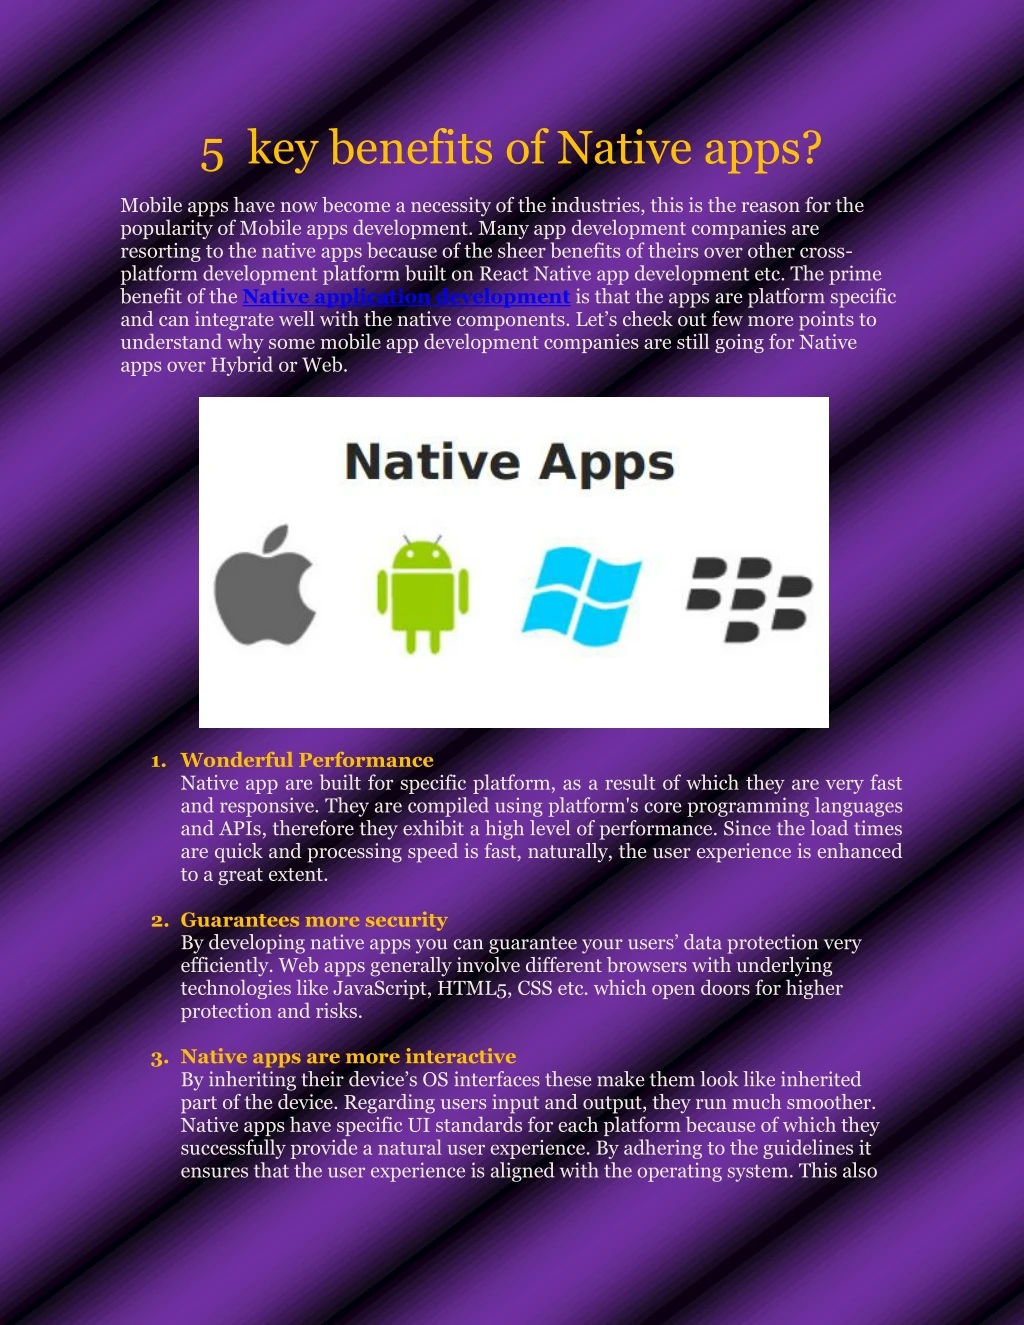 5 key benefits of native apps